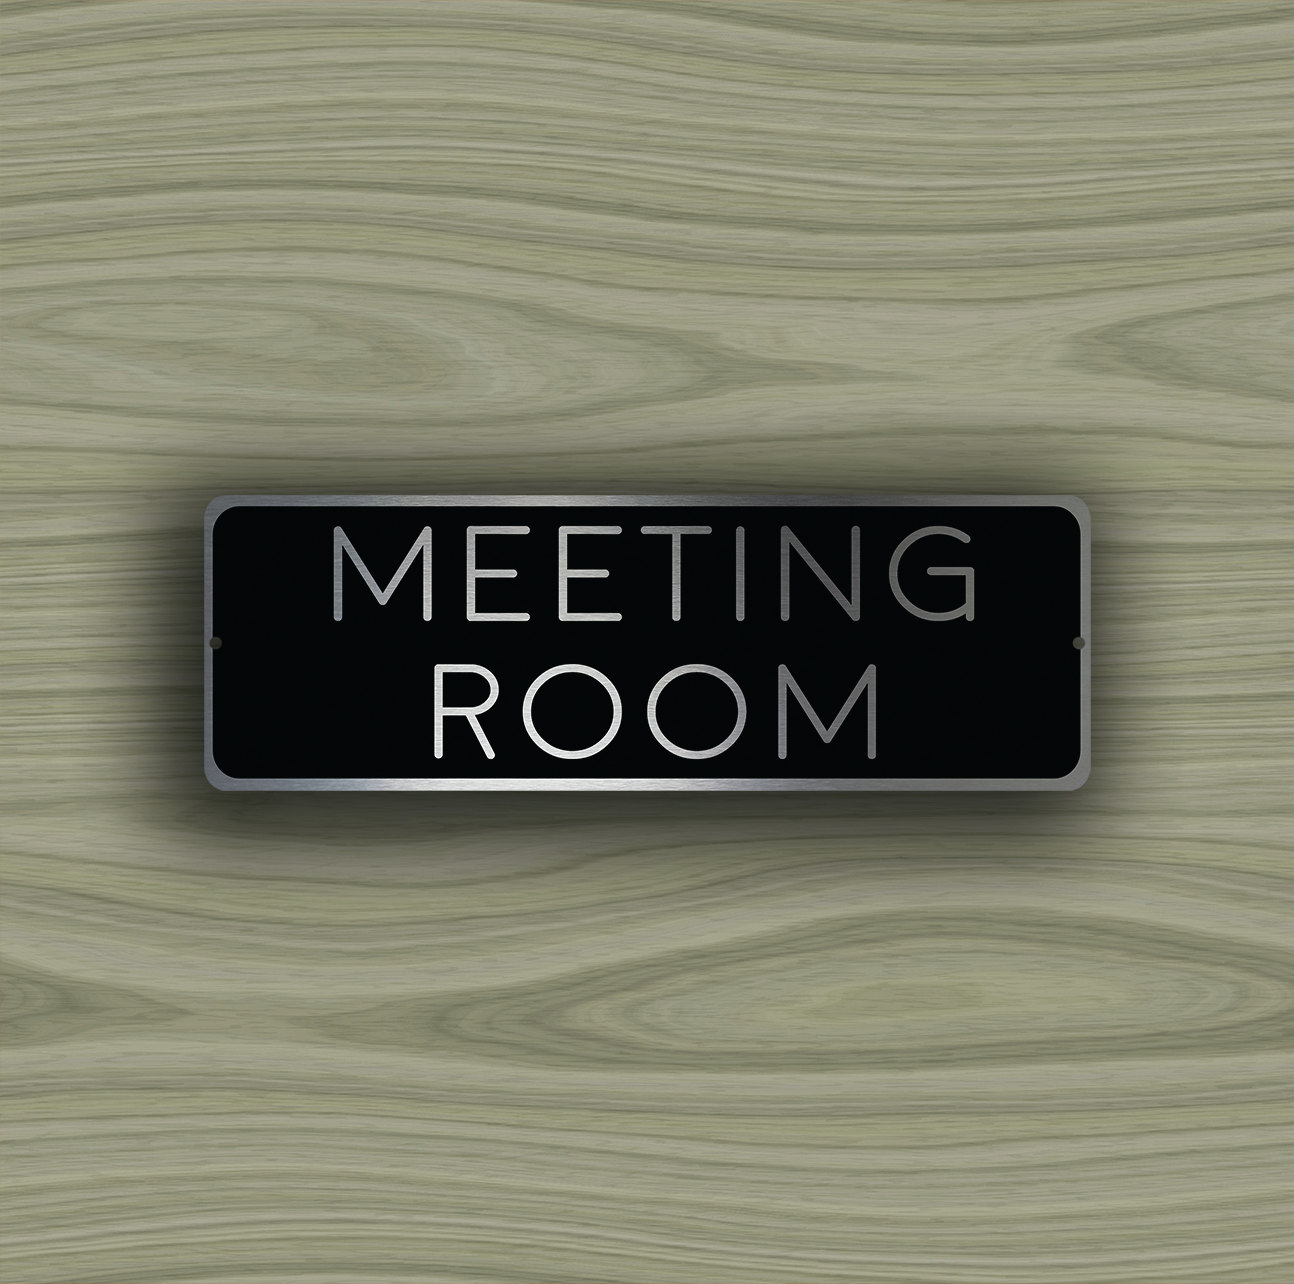 MEETING-ROOM-SIGN-2